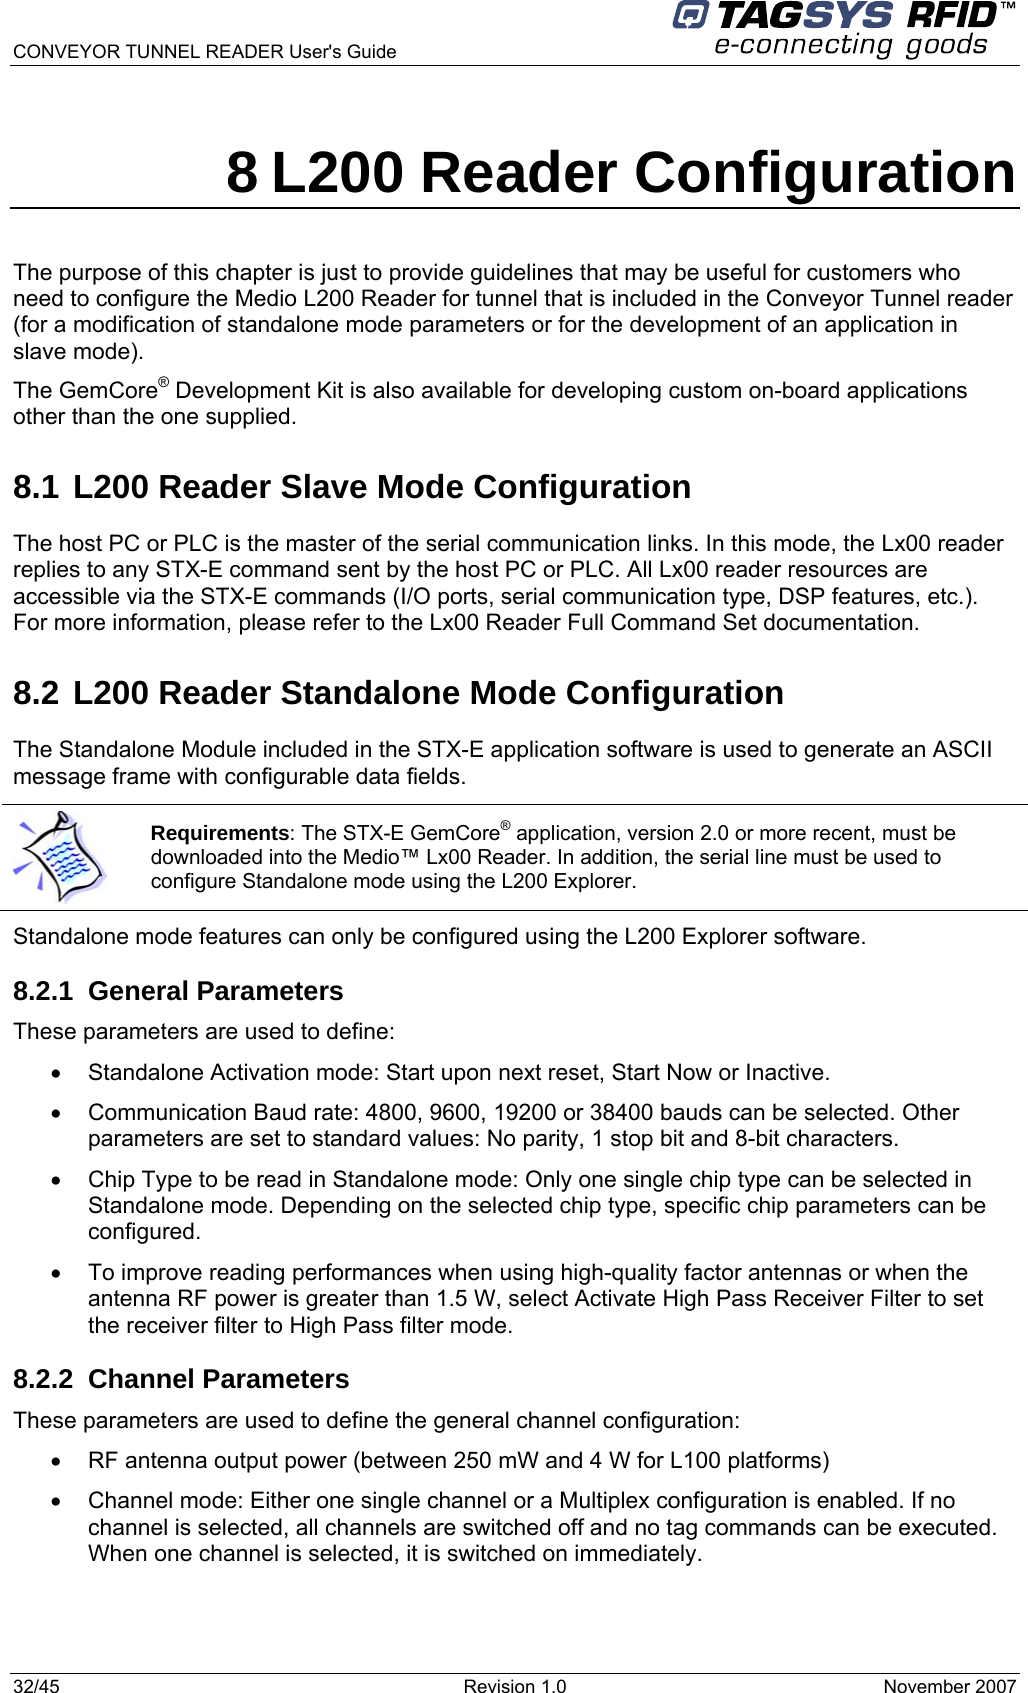  CONVEYOR TUNNEL READER User&apos;s Guide 32/45  Revision 1.0  November 2007  8 L200 Reader Configuration The purpose of this chapter is just to provide guidelines that may be useful for customers who need to configure the Medio L200 Reader for tunnel that is included in the Conveyor Tunnel reader (for a modification of standalone mode parameters or for the development of an application in slave mode).  The GemCore® Development Kit is also available for developing custom on-board applications other than the one supplied. 8.1 L200 Reader Slave Mode Configuration The host PC or PLC is the master of the serial communication links. In this mode, the Lx00 reader replies to any STX-E command sent by the host PC or PLC. All Lx00 reader resources are accessible via the STX-E commands (I/O ports, serial communication type, DSP features, etc.). For more information, please refer to the Lx00 Reader Full Command Set documentation. 8.2 L200 Reader Standalone Mode Configuration The Standalone Module included in the STX-E application software is used to generate an ASCII message frame with configurable data fields.  Standalone mode features can only be configured using the L200 Explorer software. 8.2.1 General Parameters These parameters are used to define: •  Standalone Activation mode: Start upon next reset, Start Now or Inactive. •  Communication Baud rate: 4800, 9600, 19200 or 38400 bauds can be selected. Other parameters are set to standard values: No parity, 1 stop bit and 8-bit characters. •  Chip Type to be read in Standalone mode: Only one single chip type can be selected in Standalone mode. Depending on the selected chip type, specific chip parameters can be configured. •  To improve reading performances when using high-quality factor antennas or when the antenna RF power is greater than 1.5 W, select Activate High Pass Receiver Filter to set the receiver filter to High Pass filter mode.  8.2.2 Channel Parameters These parameters are used to define the general channel configuration:  •  RF antenna output power (between 250 mW and 4 W for L100 platforms) •  Channel mode: Either one single channel or a Multiplex configuration is enabled. If no channel is selected, all channels are switched off and no tag commands can be executed. When one channel is selected, it is switched on immediately.   Requirements: The STX-E GemCore® application, version 2.0 or more recent, must be downloaded into the Medio™ Lx00 Reader. In addition, the serial line must be used to configure Standalone mode using the L200 Explorer. 